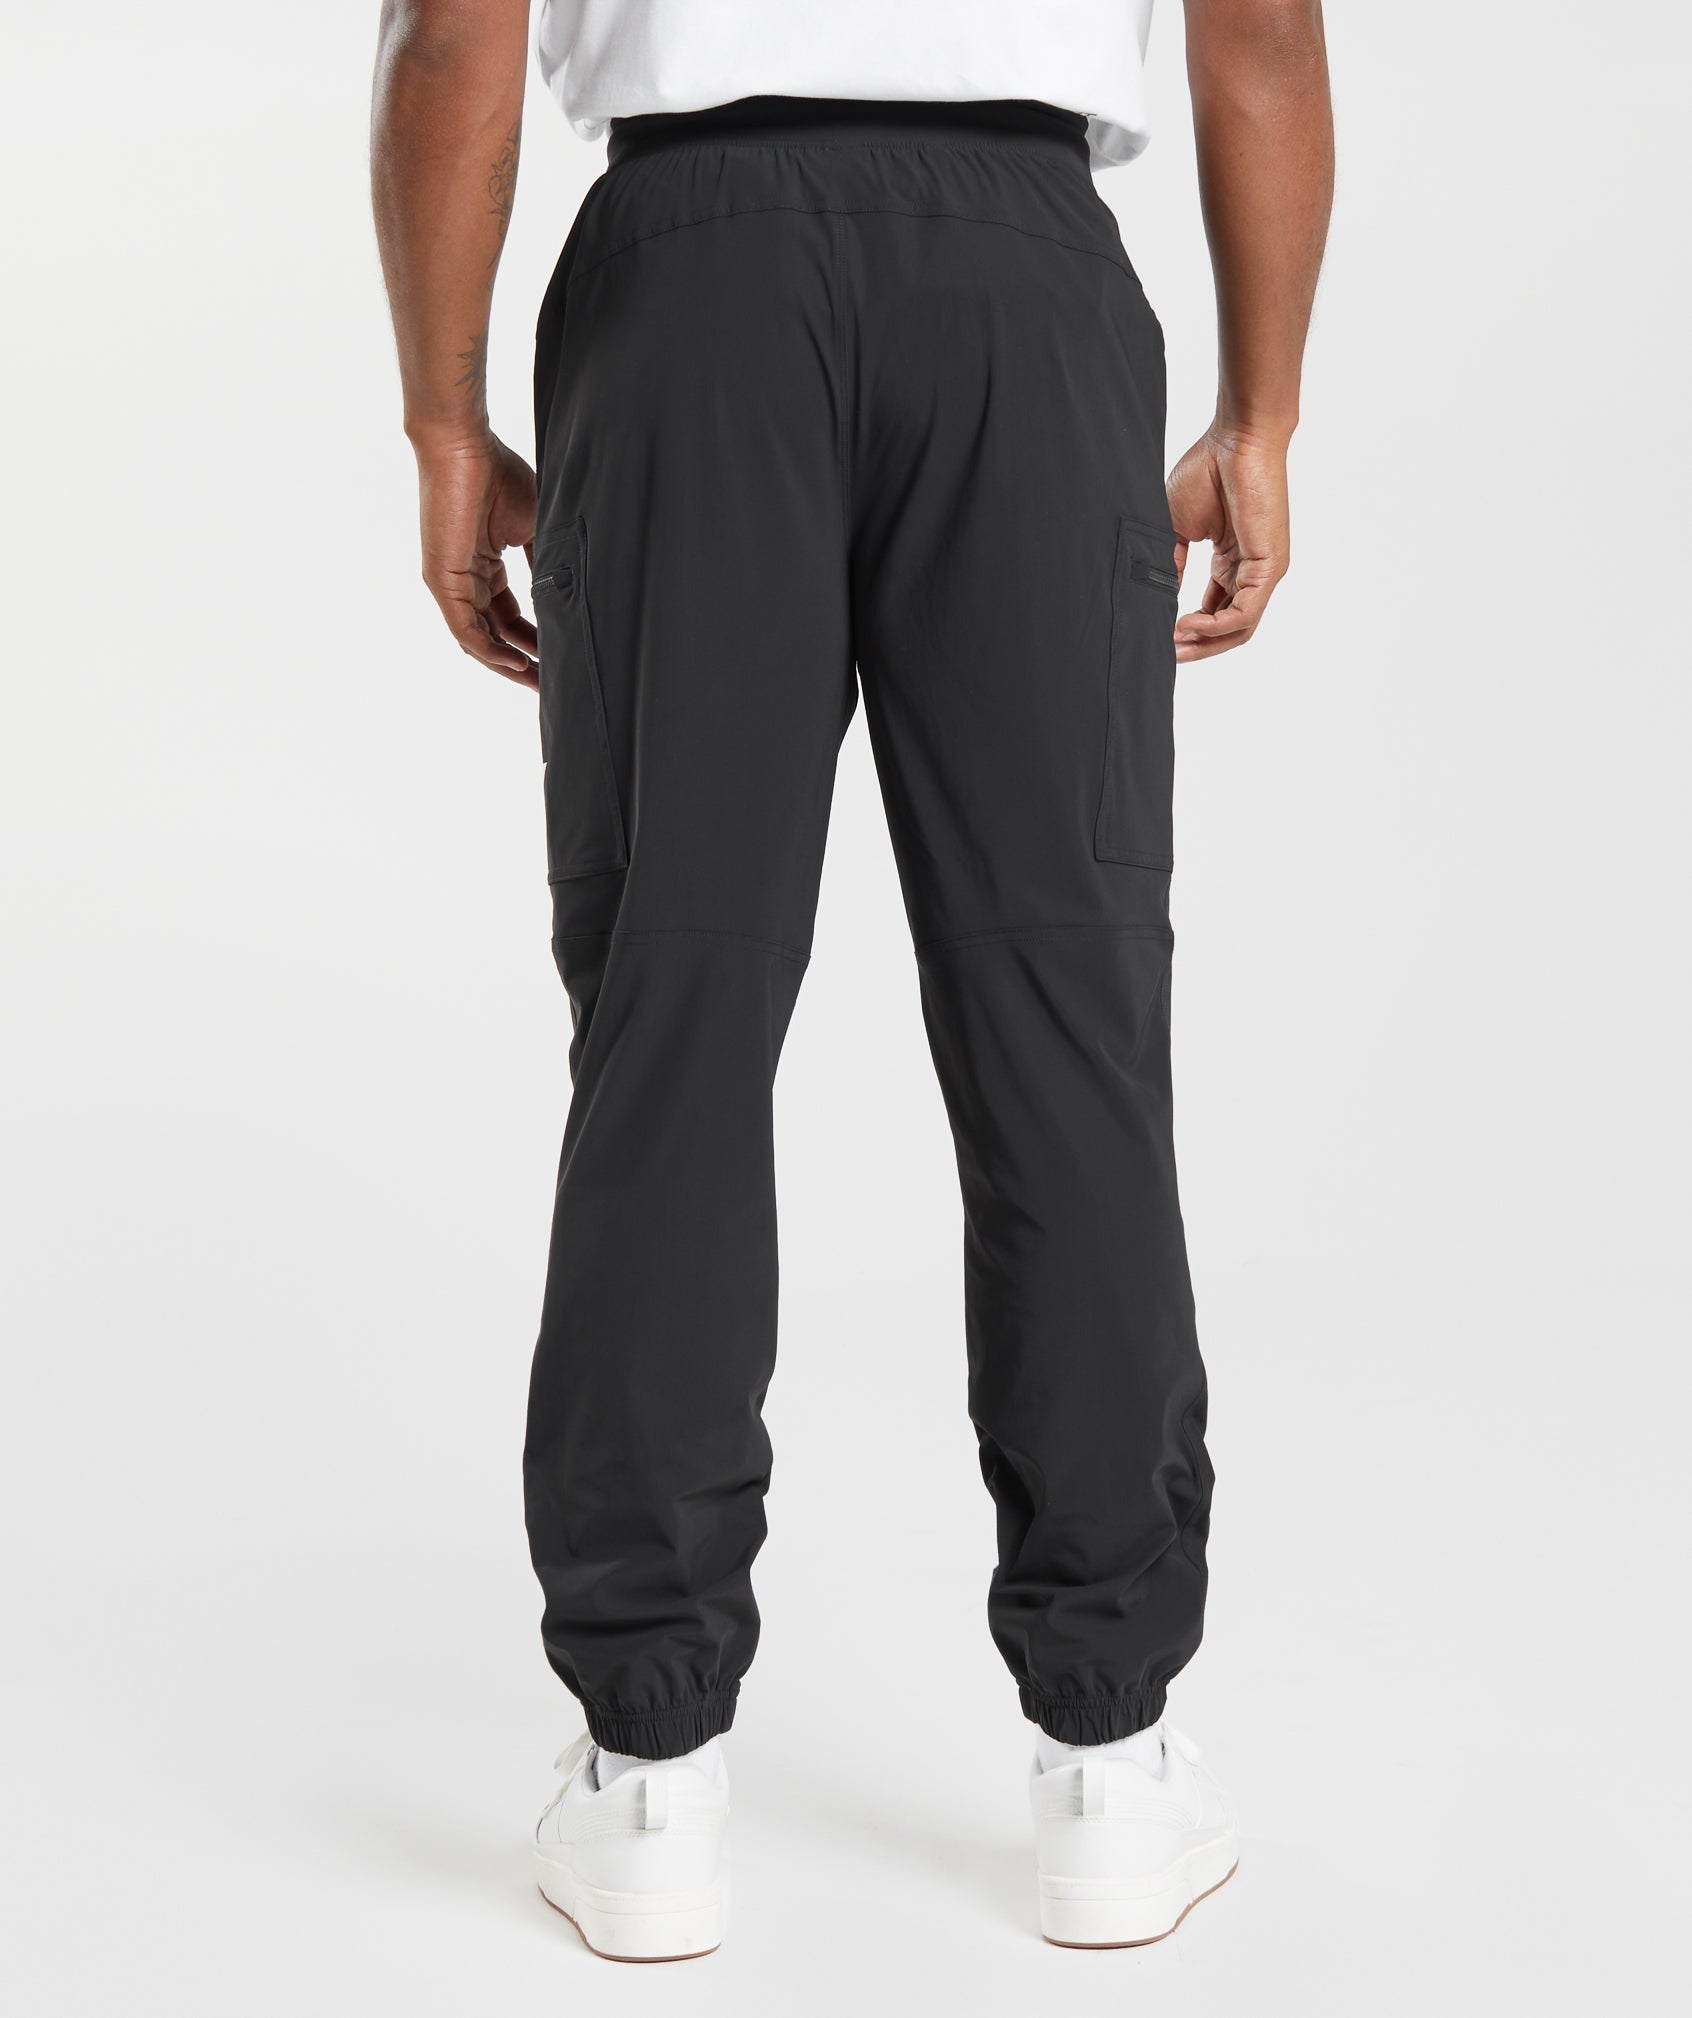 Rest Day Cargo Pants in Black - view 3